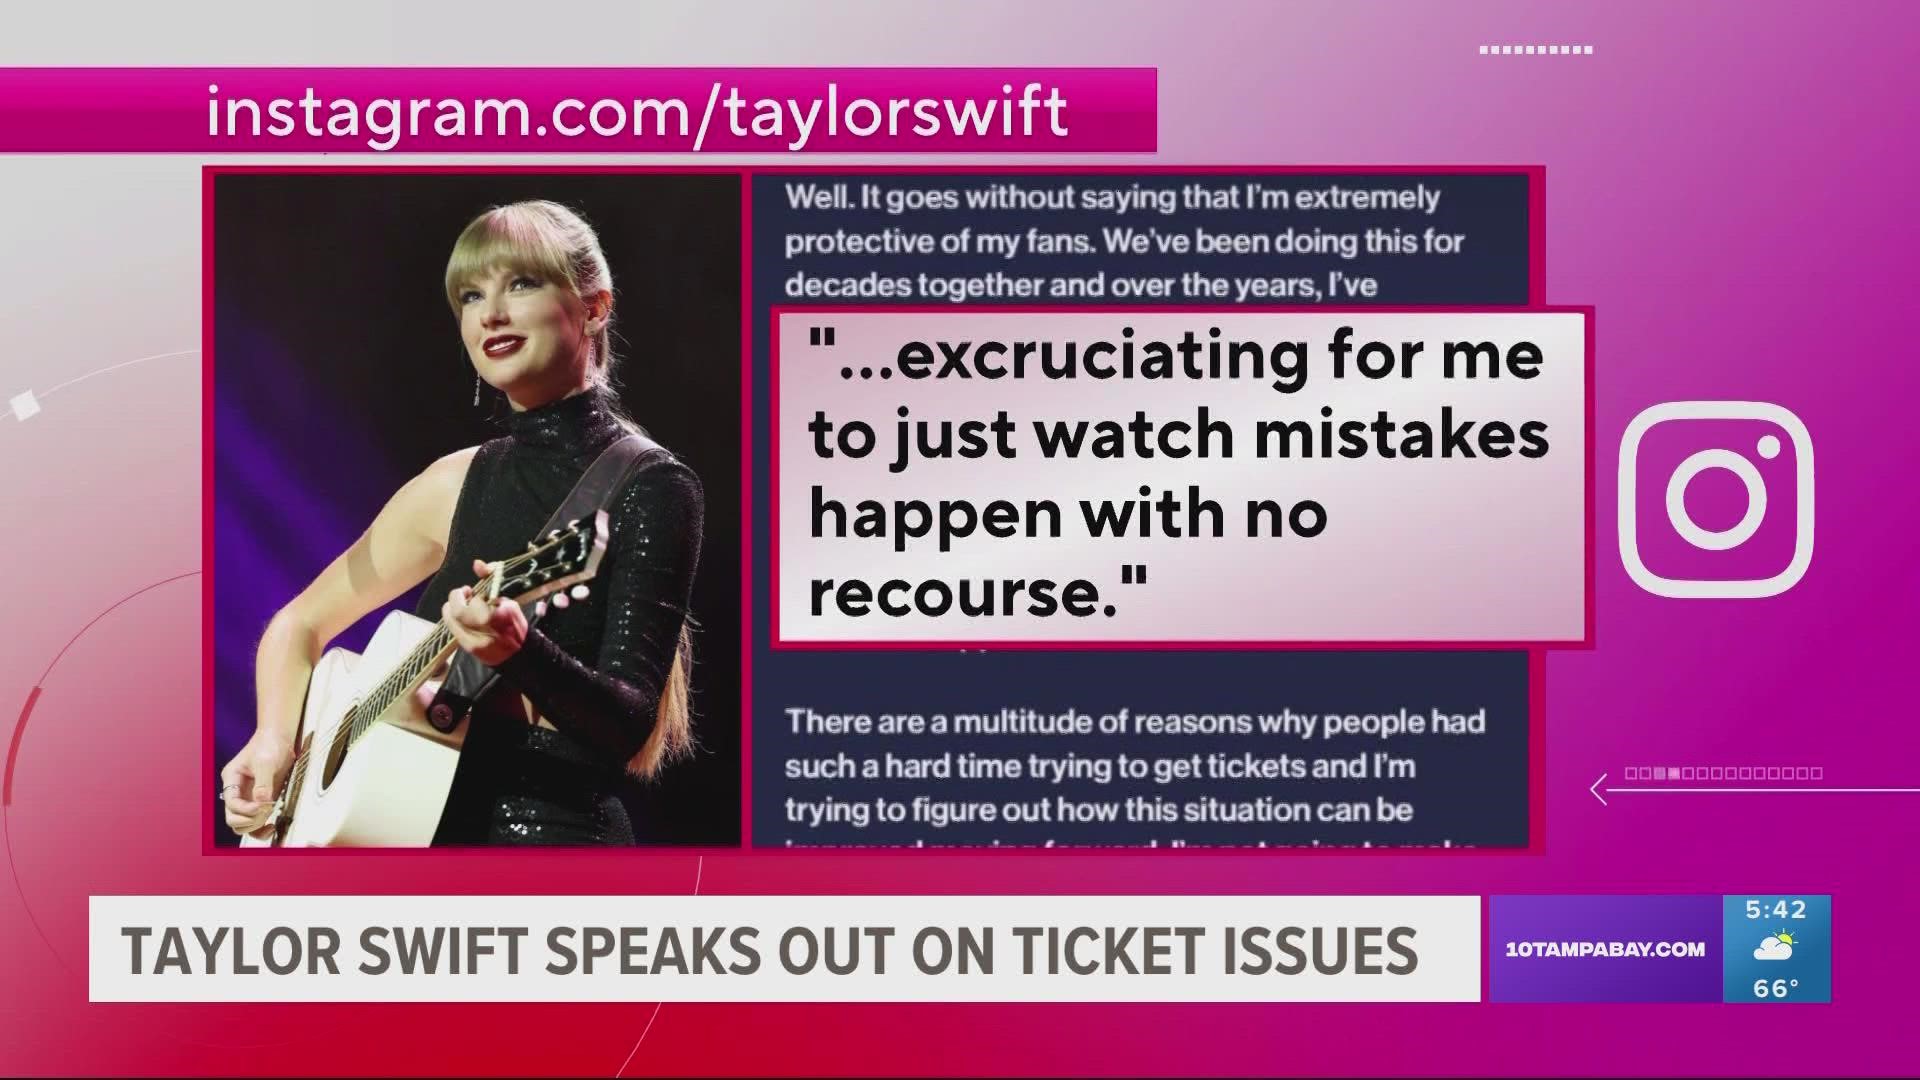 Taylor Swift is speaking out for the first time about the "excruciating" ticket sales situation for her upcoming tour.